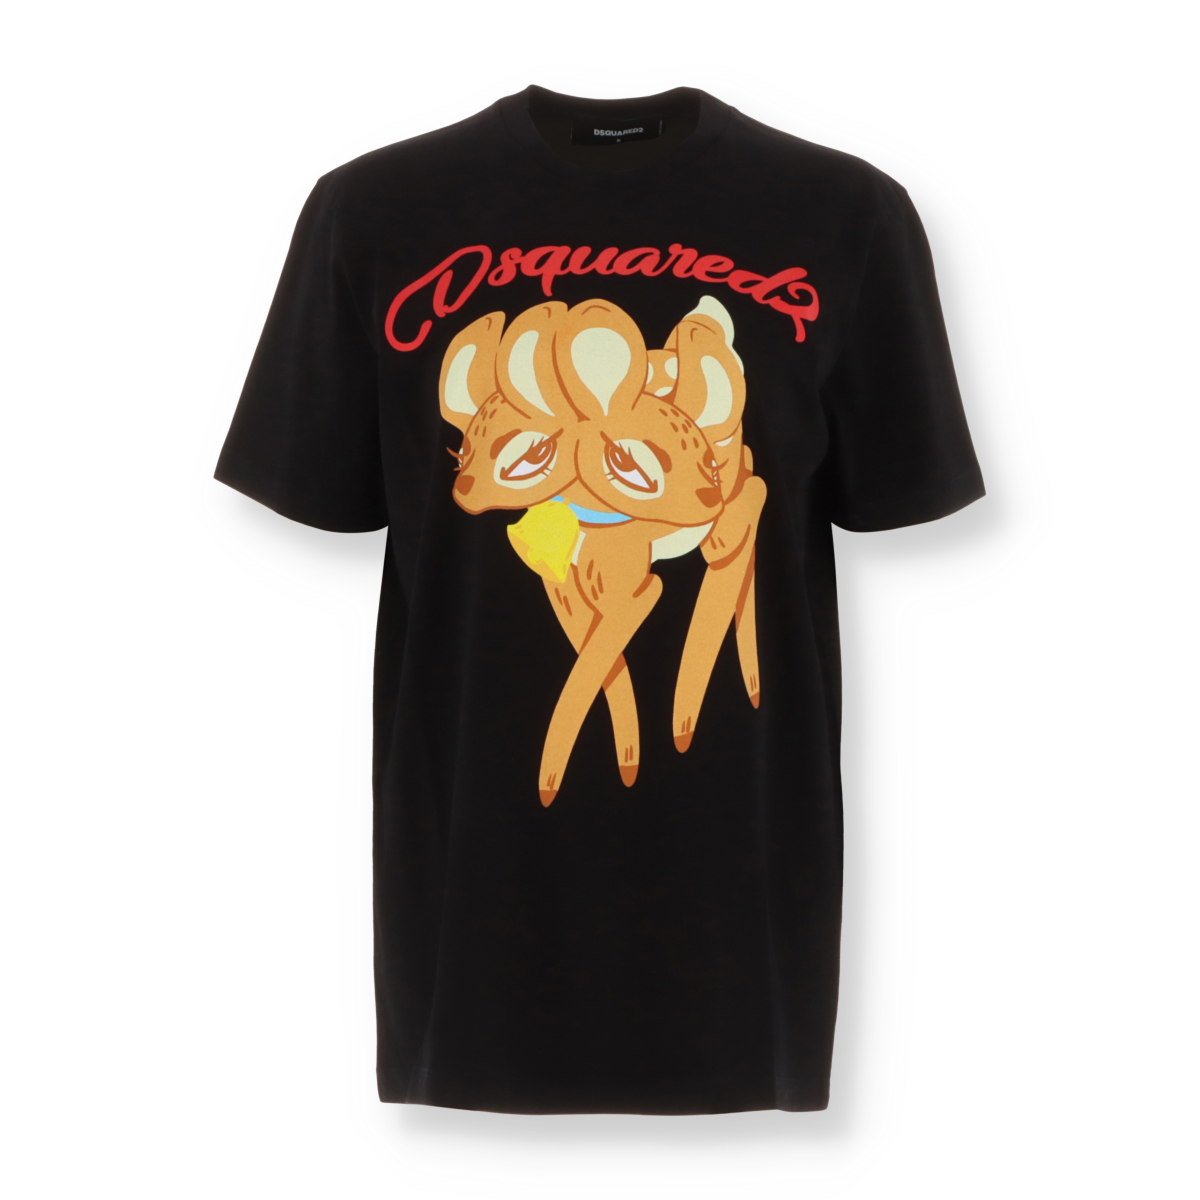 Marques de luxe | T-shirt Dsquared2 Bambi Smoke - Outlet | Drake Store